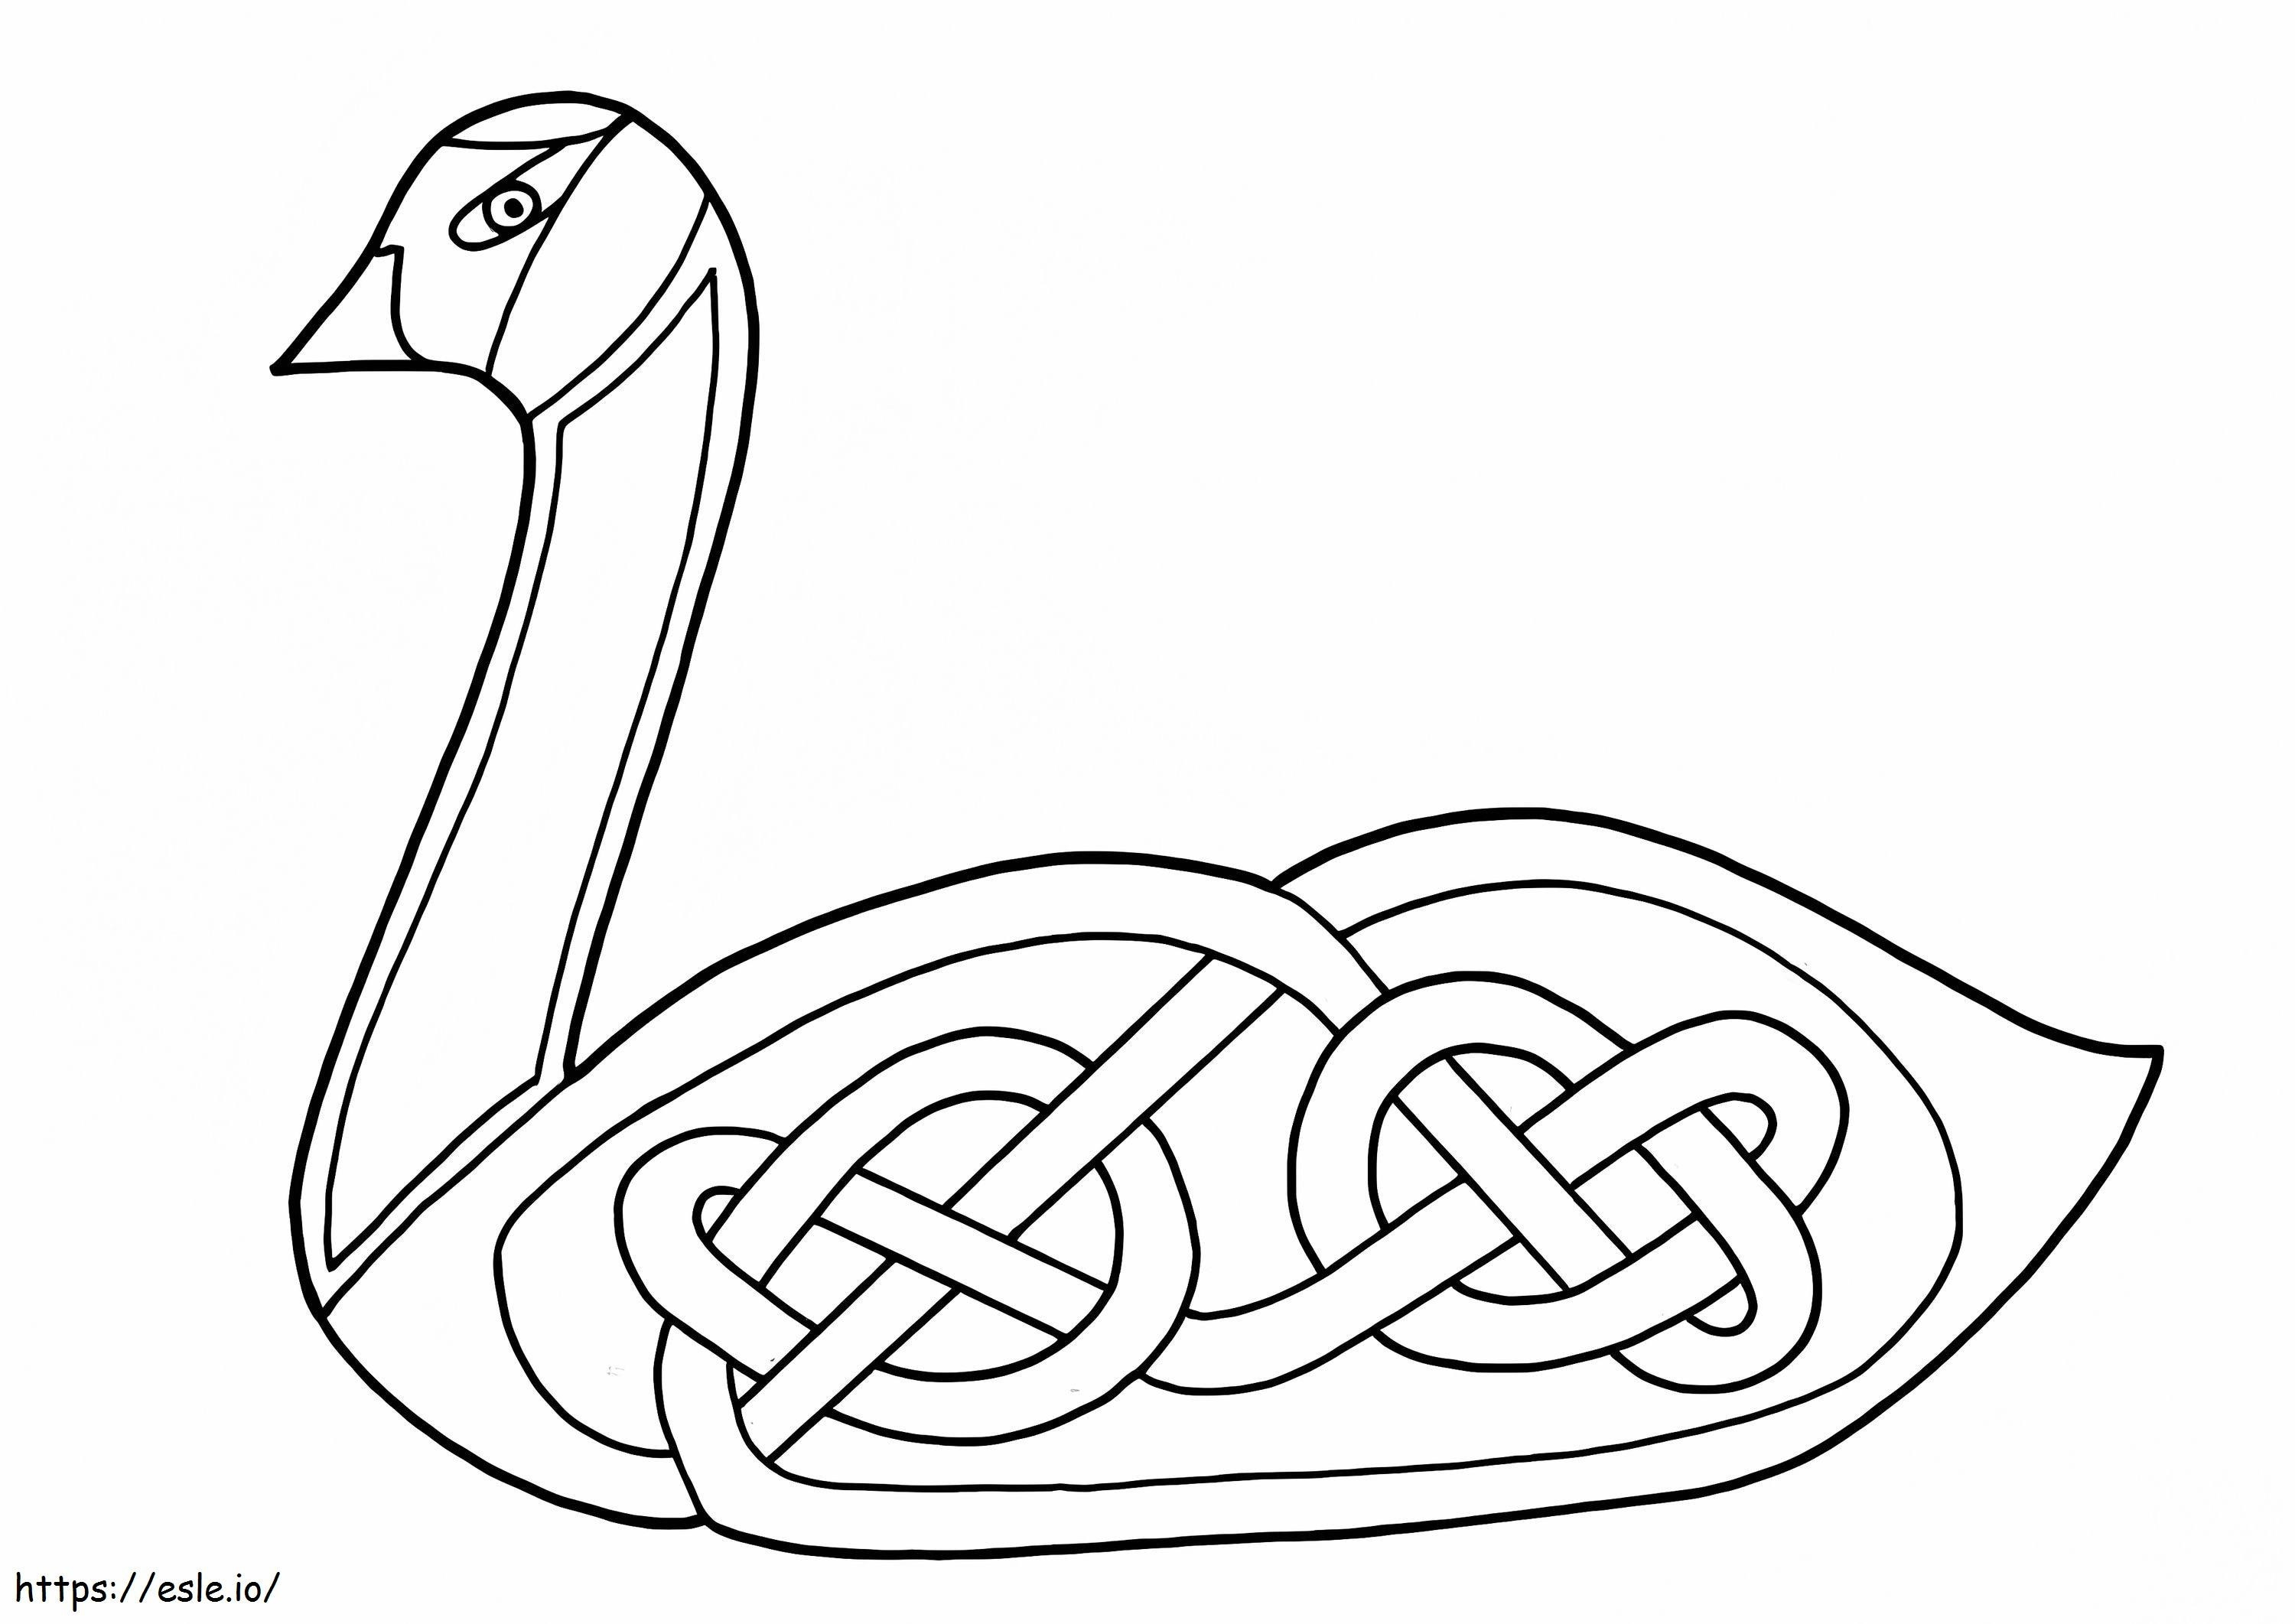 Celtic Swan Design coloring page